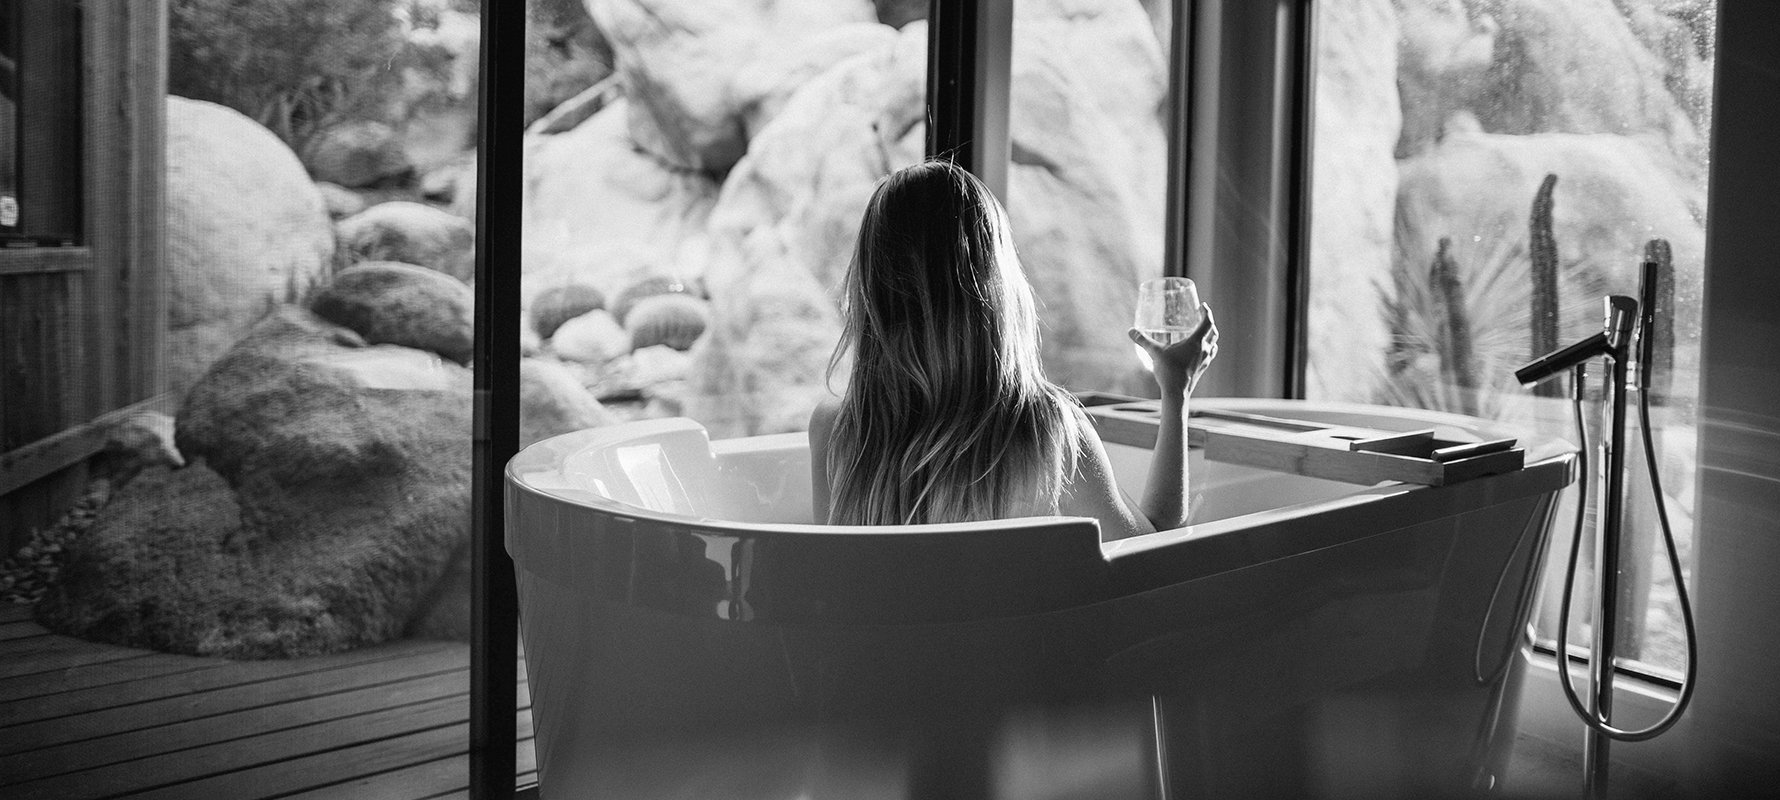 woman sitting in a bath tub holding a glass of a drink